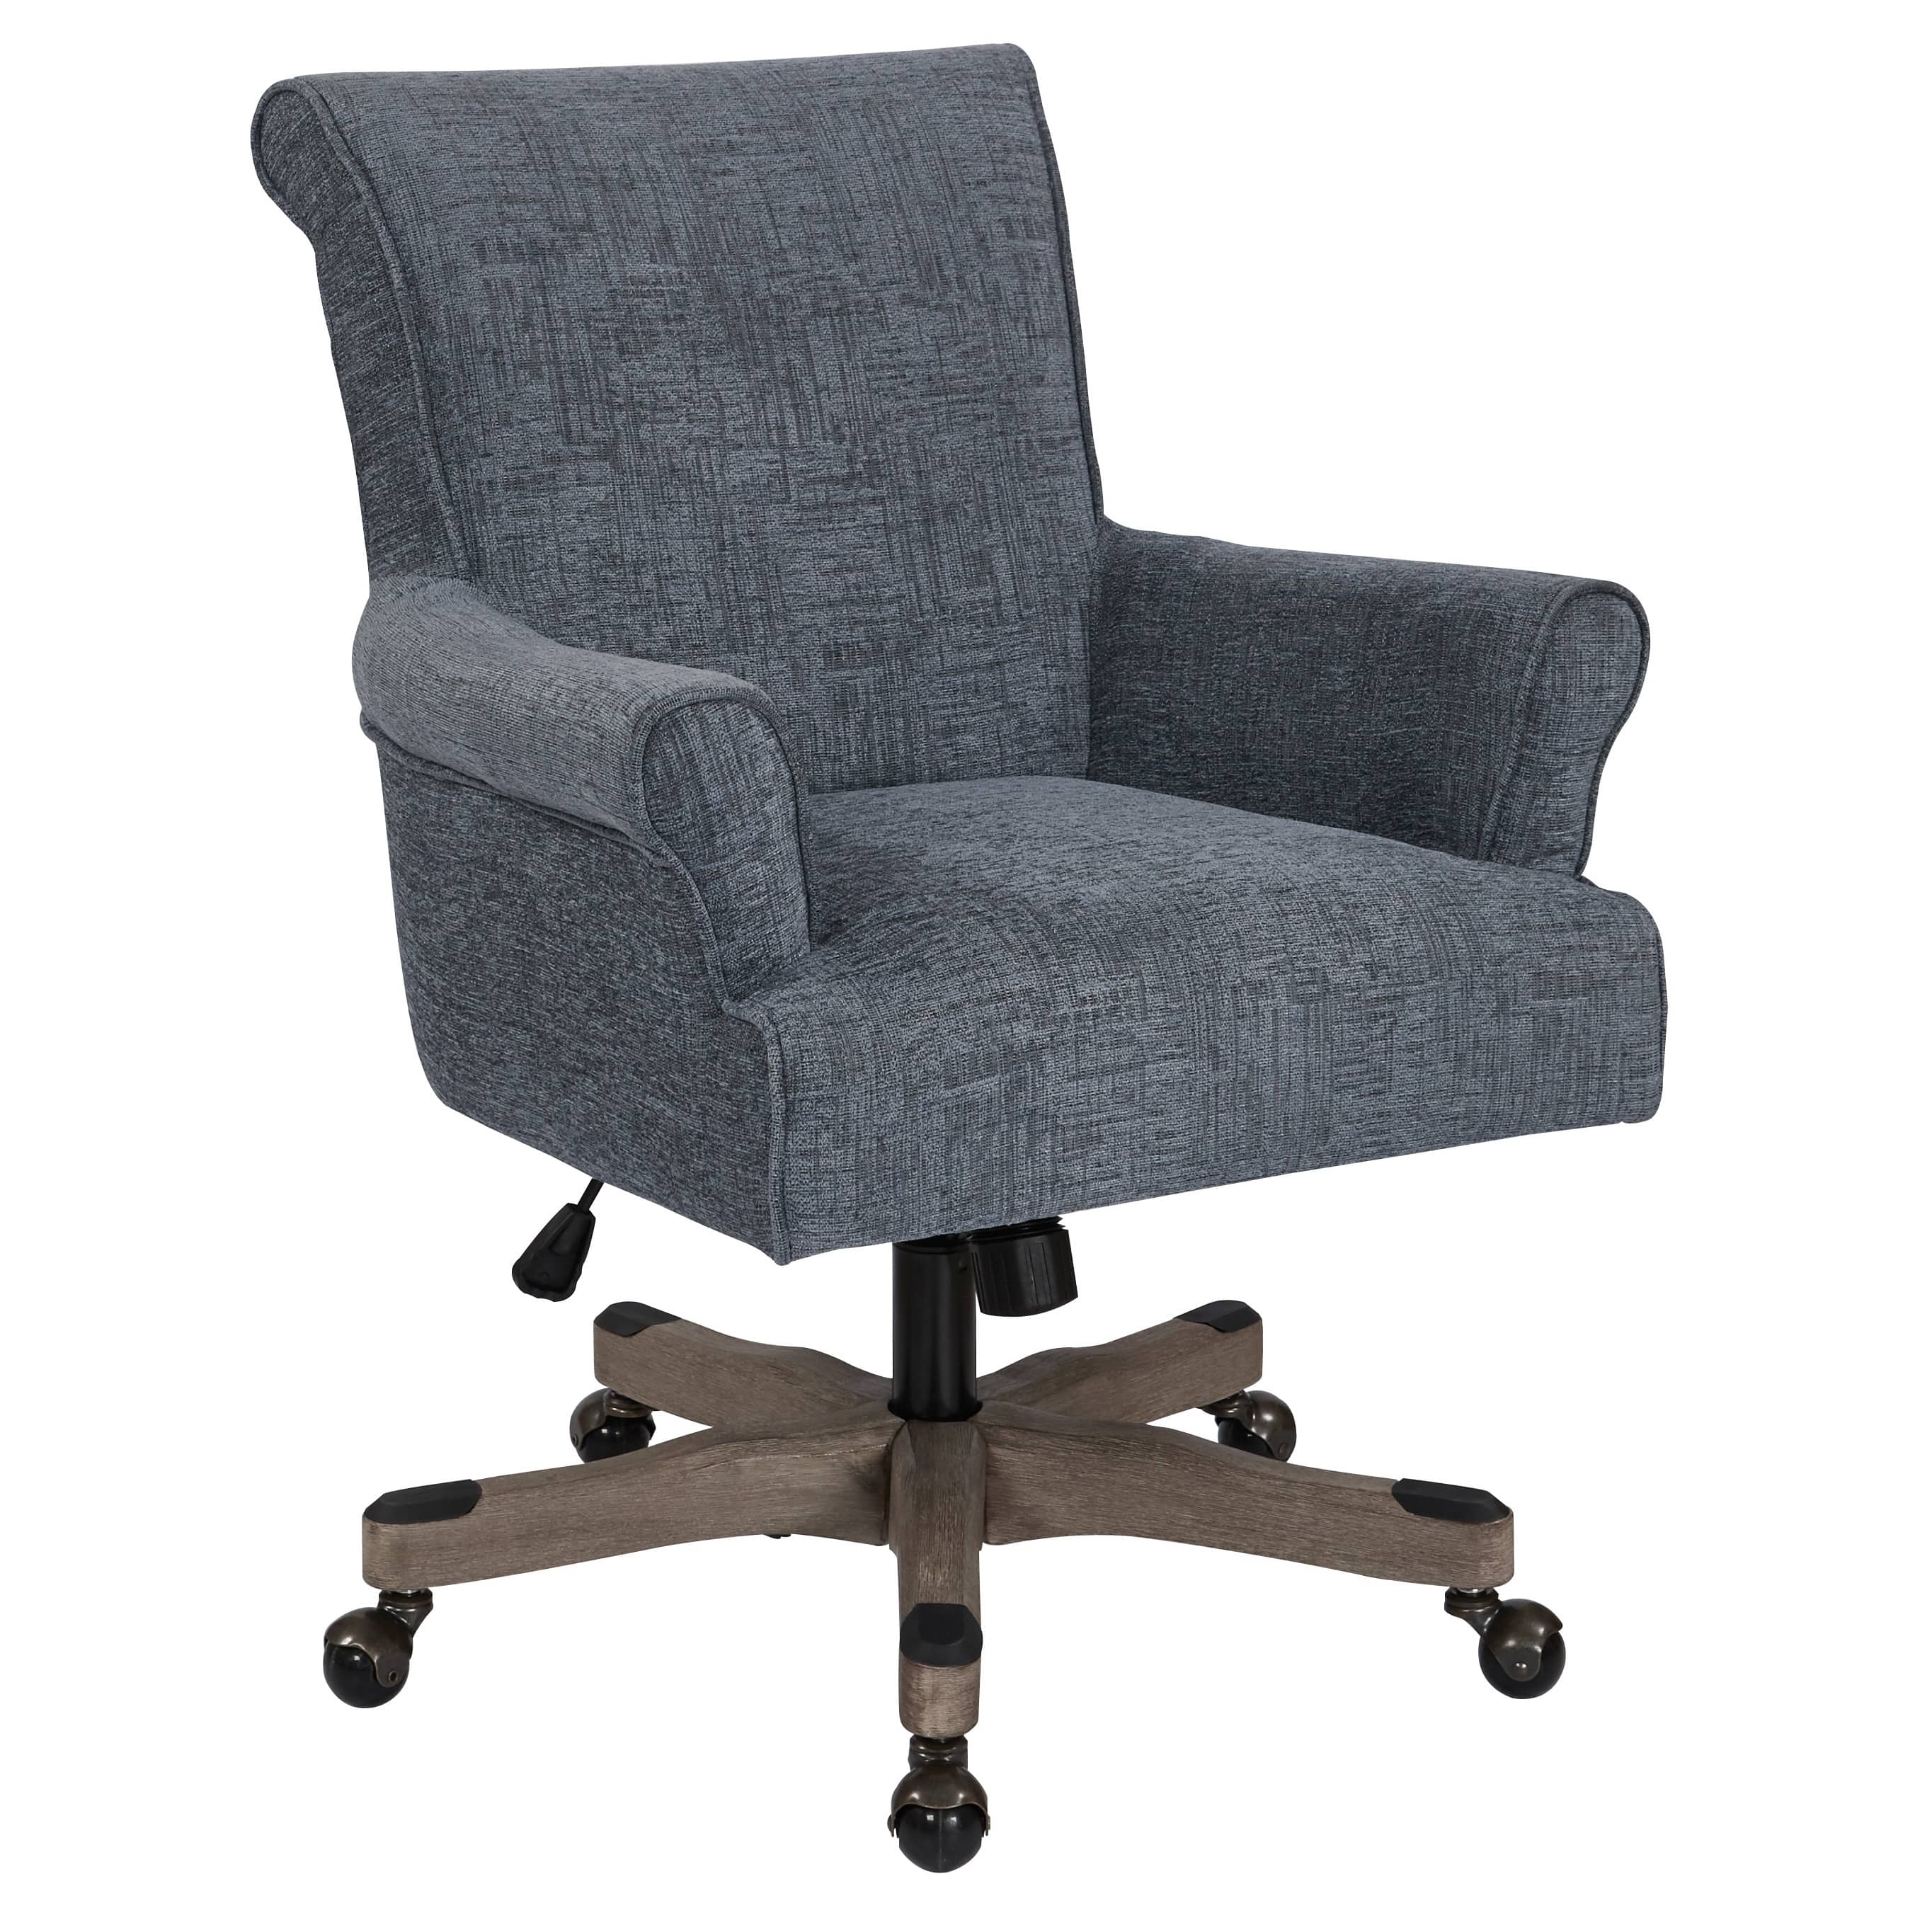 OSP Home Furnishings Megan Office Chair With Grey Wash Wood Base N A E71b4b51 7c3e 4f47 B414 519e540b2f9c ?impolicy=medium